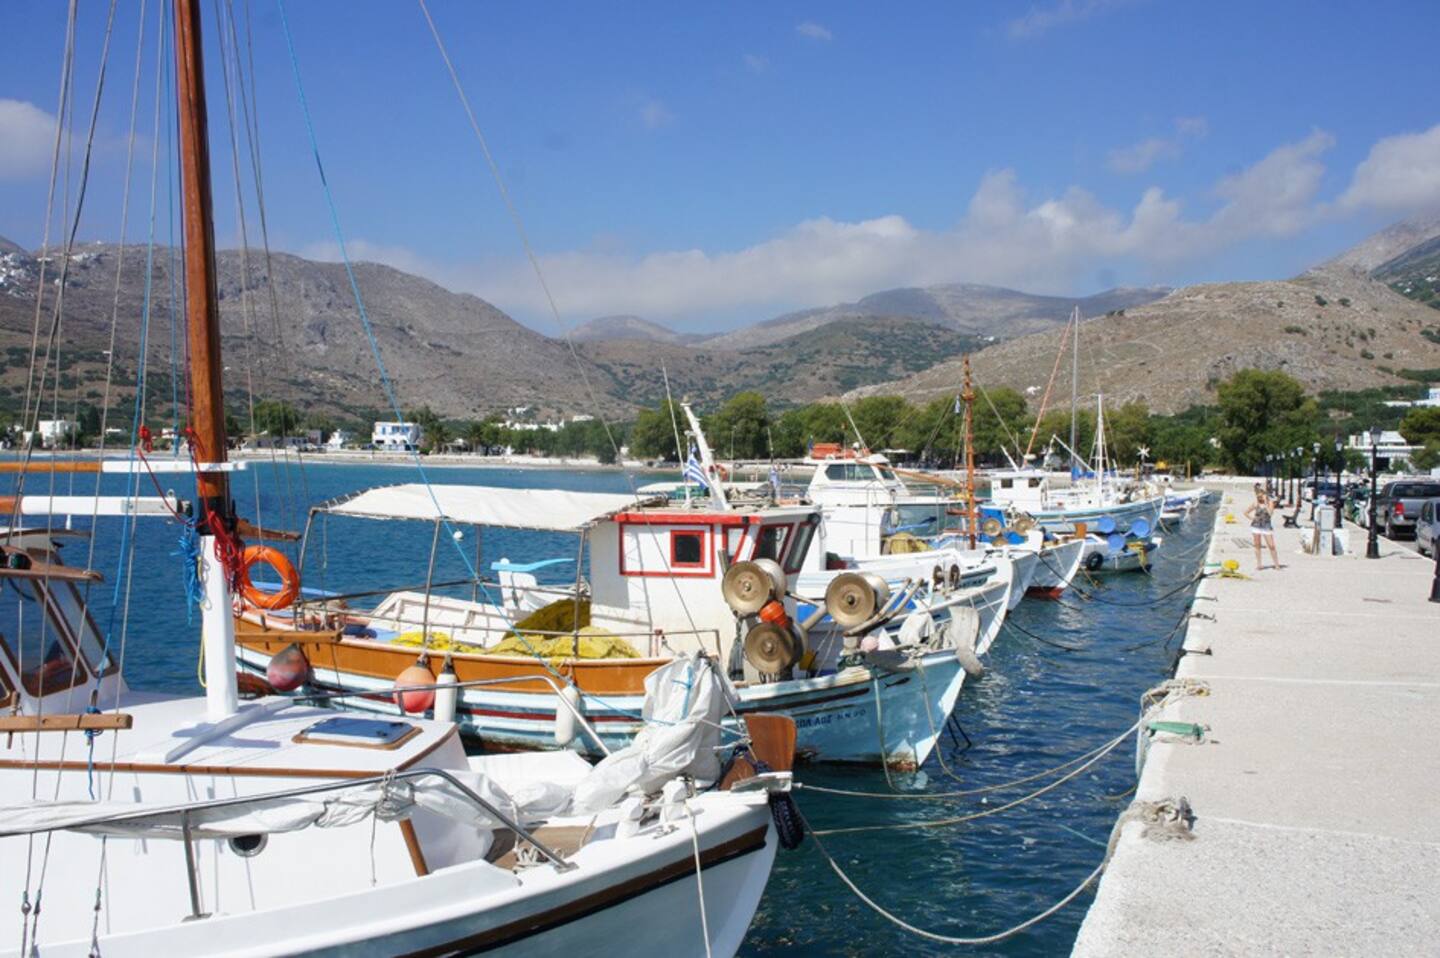 Fishing boats in the port of Aigiali, Ormos, Amorgos